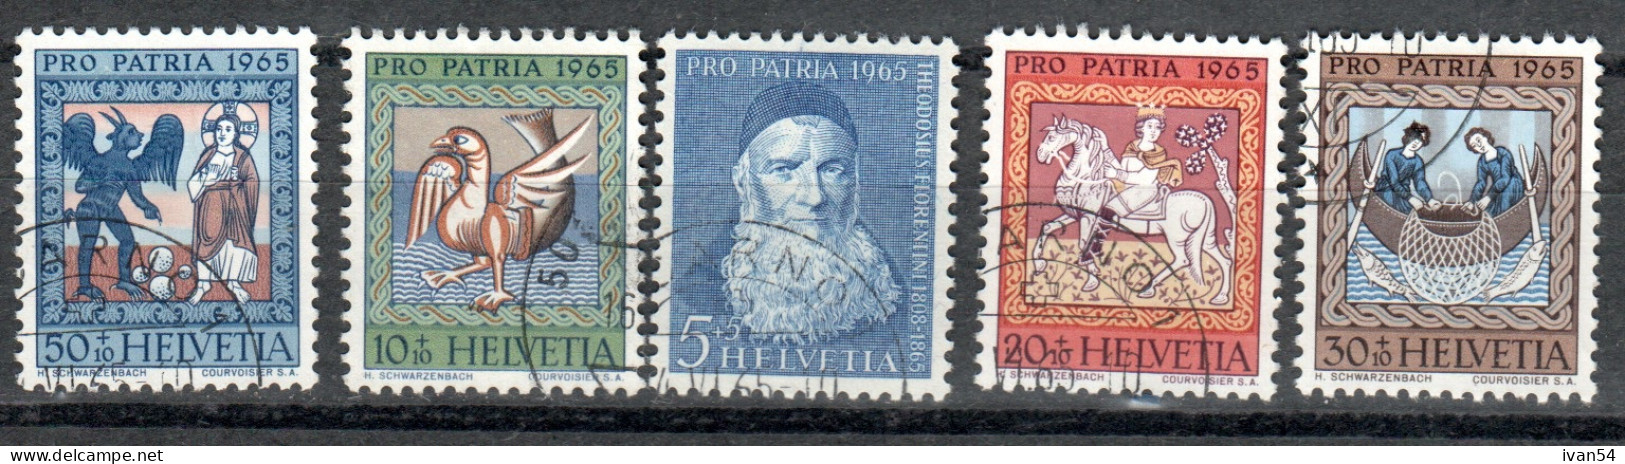 Zwitserland Suisse  747-51 (0) – PRO PATRIA 1965 - Used Stamps